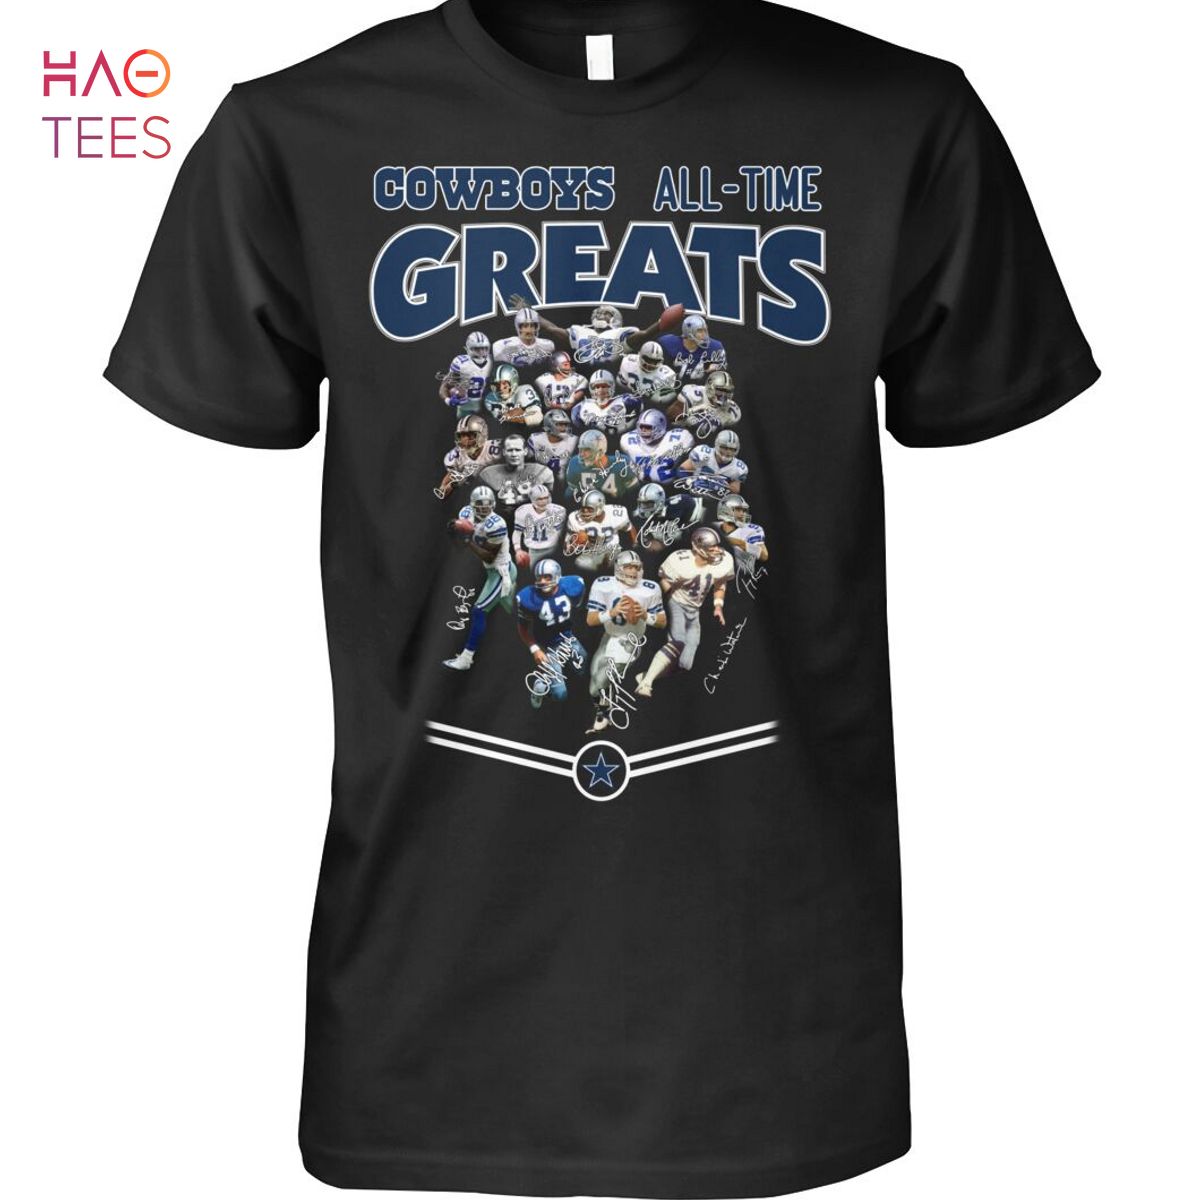 Cowboys All-Time Greats Shirt Limited Edition